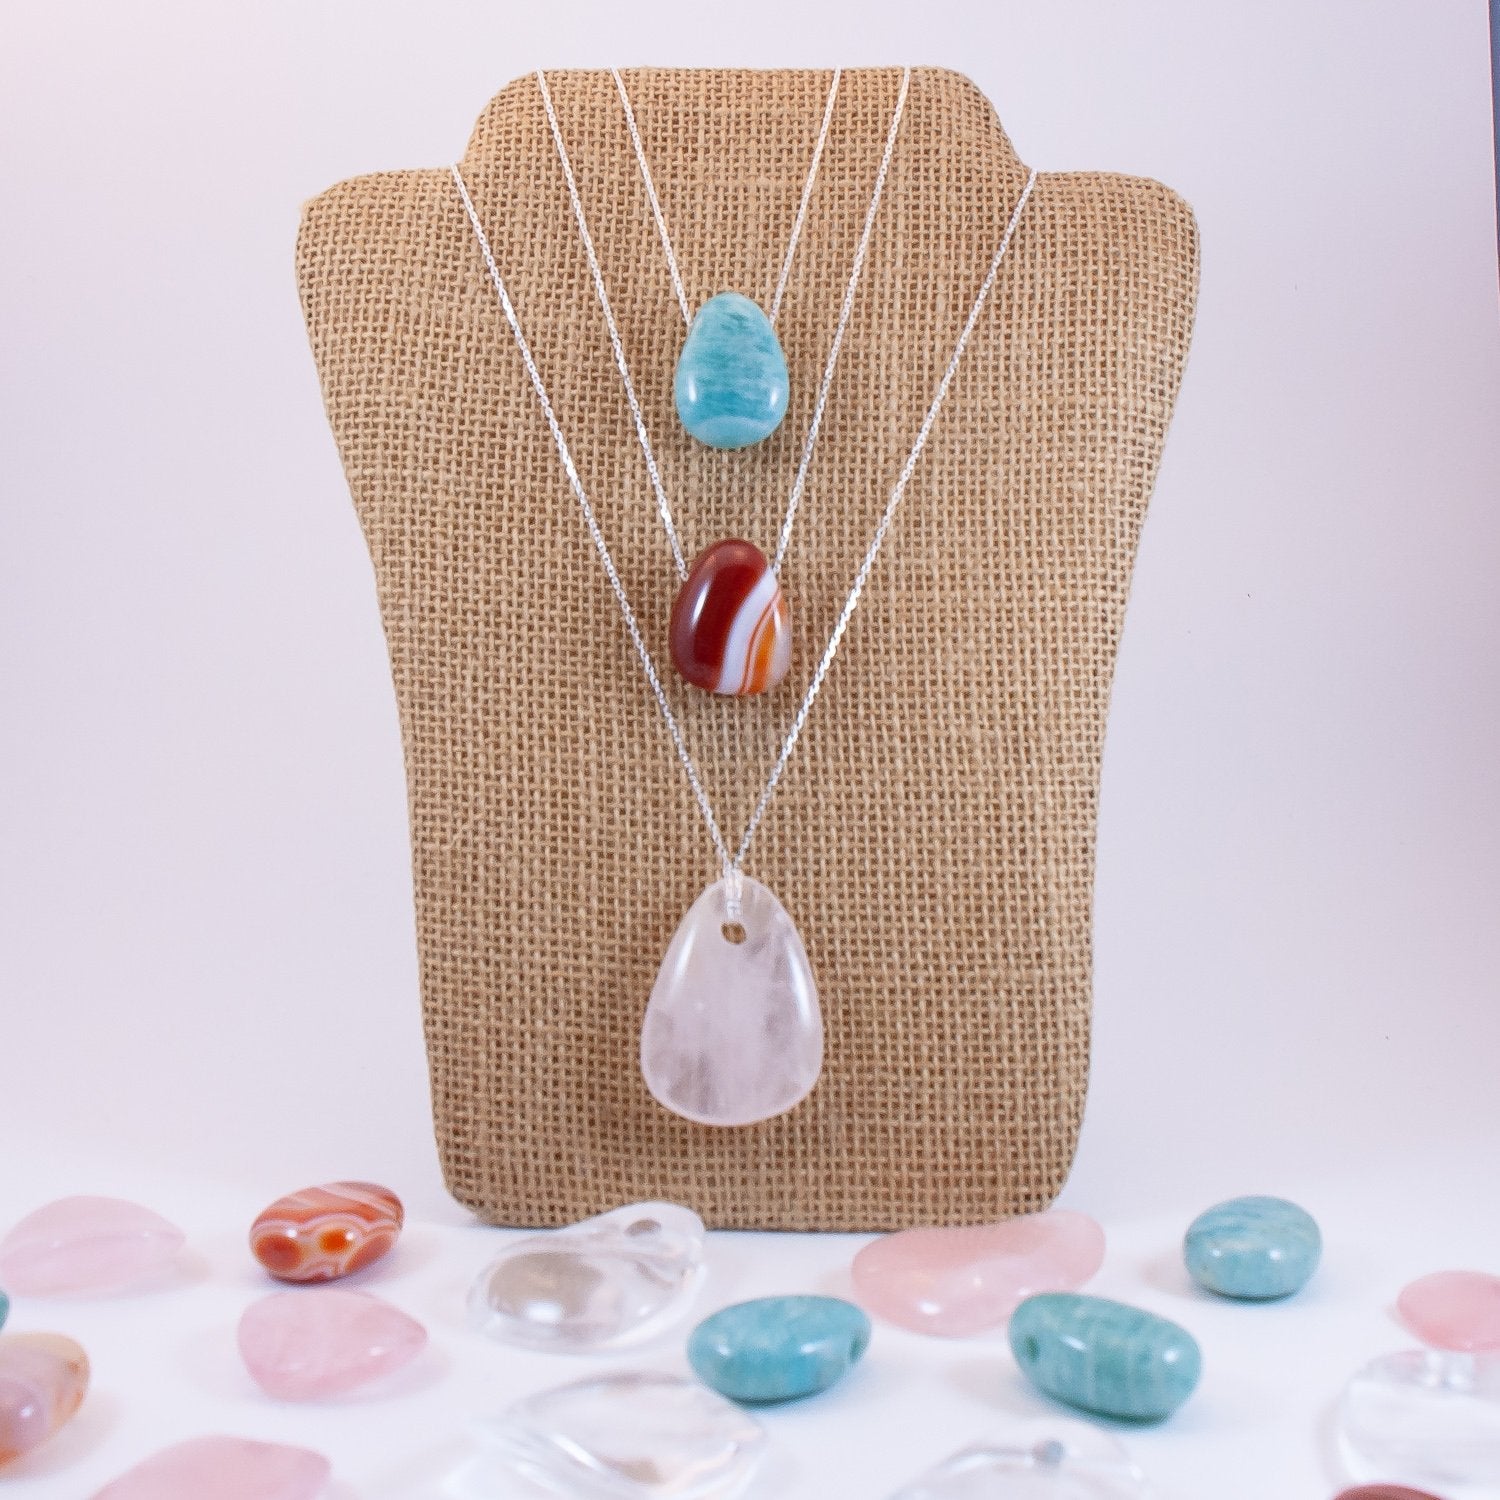 Crystal drop pendant necklaces on necklace display. Amazonite, carnelian, and clear quartz.